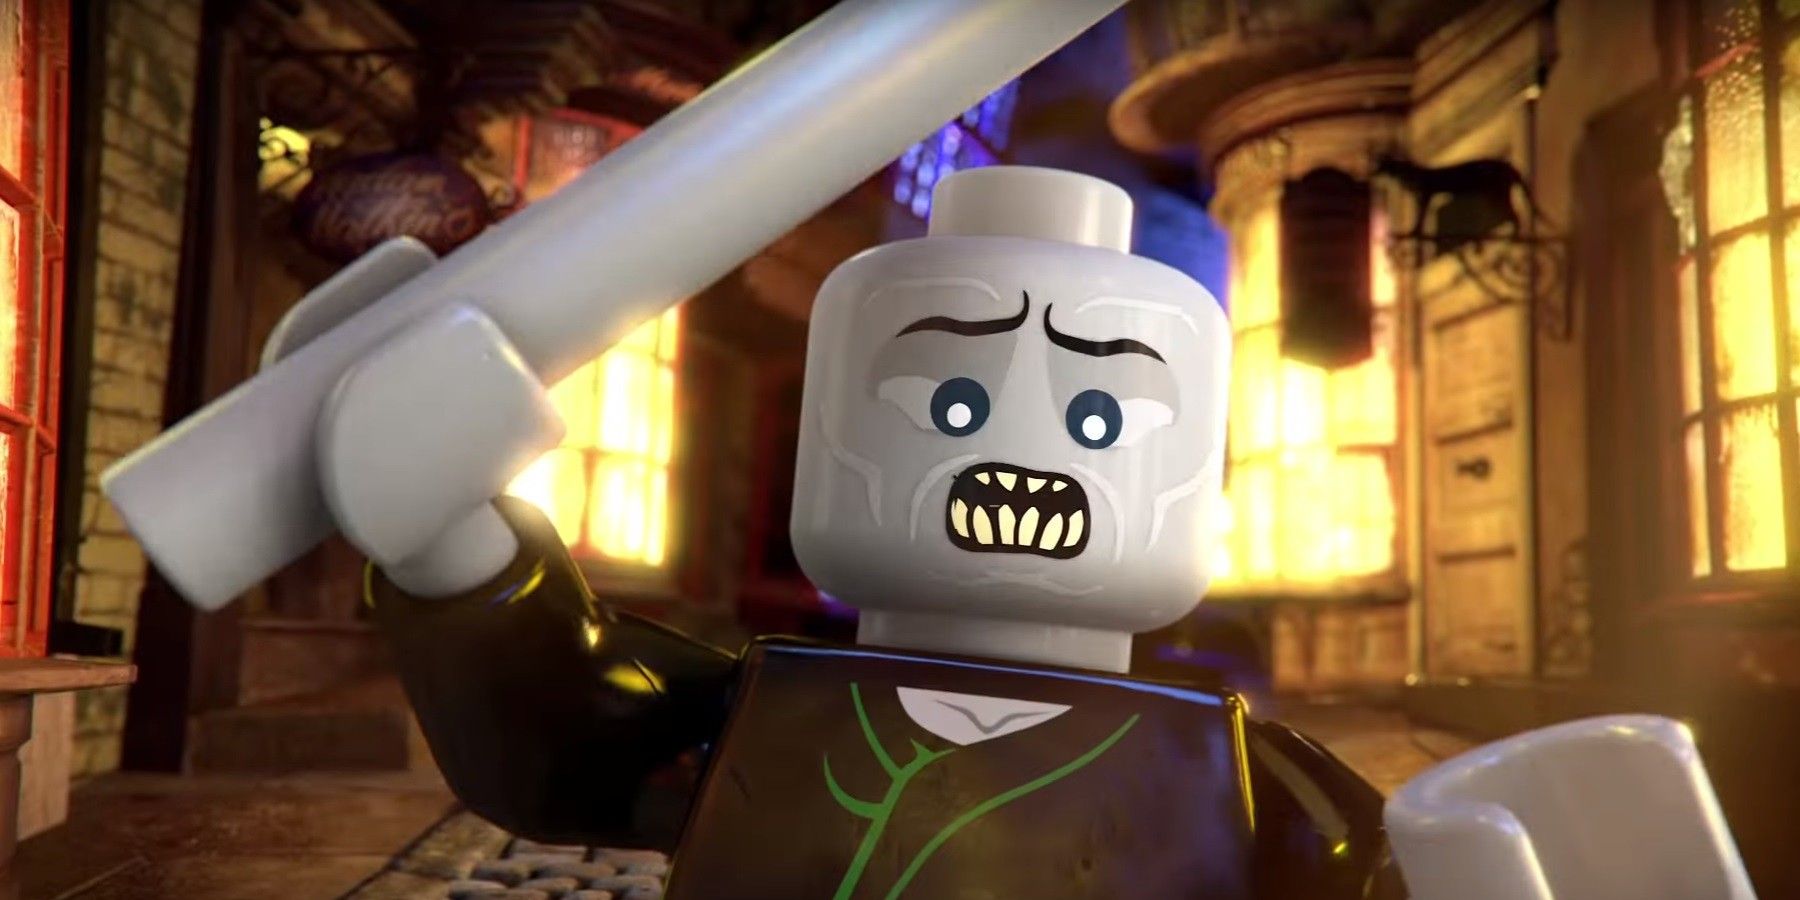 Voldemort raising his wand and yelling in The LEGO Batman Movie